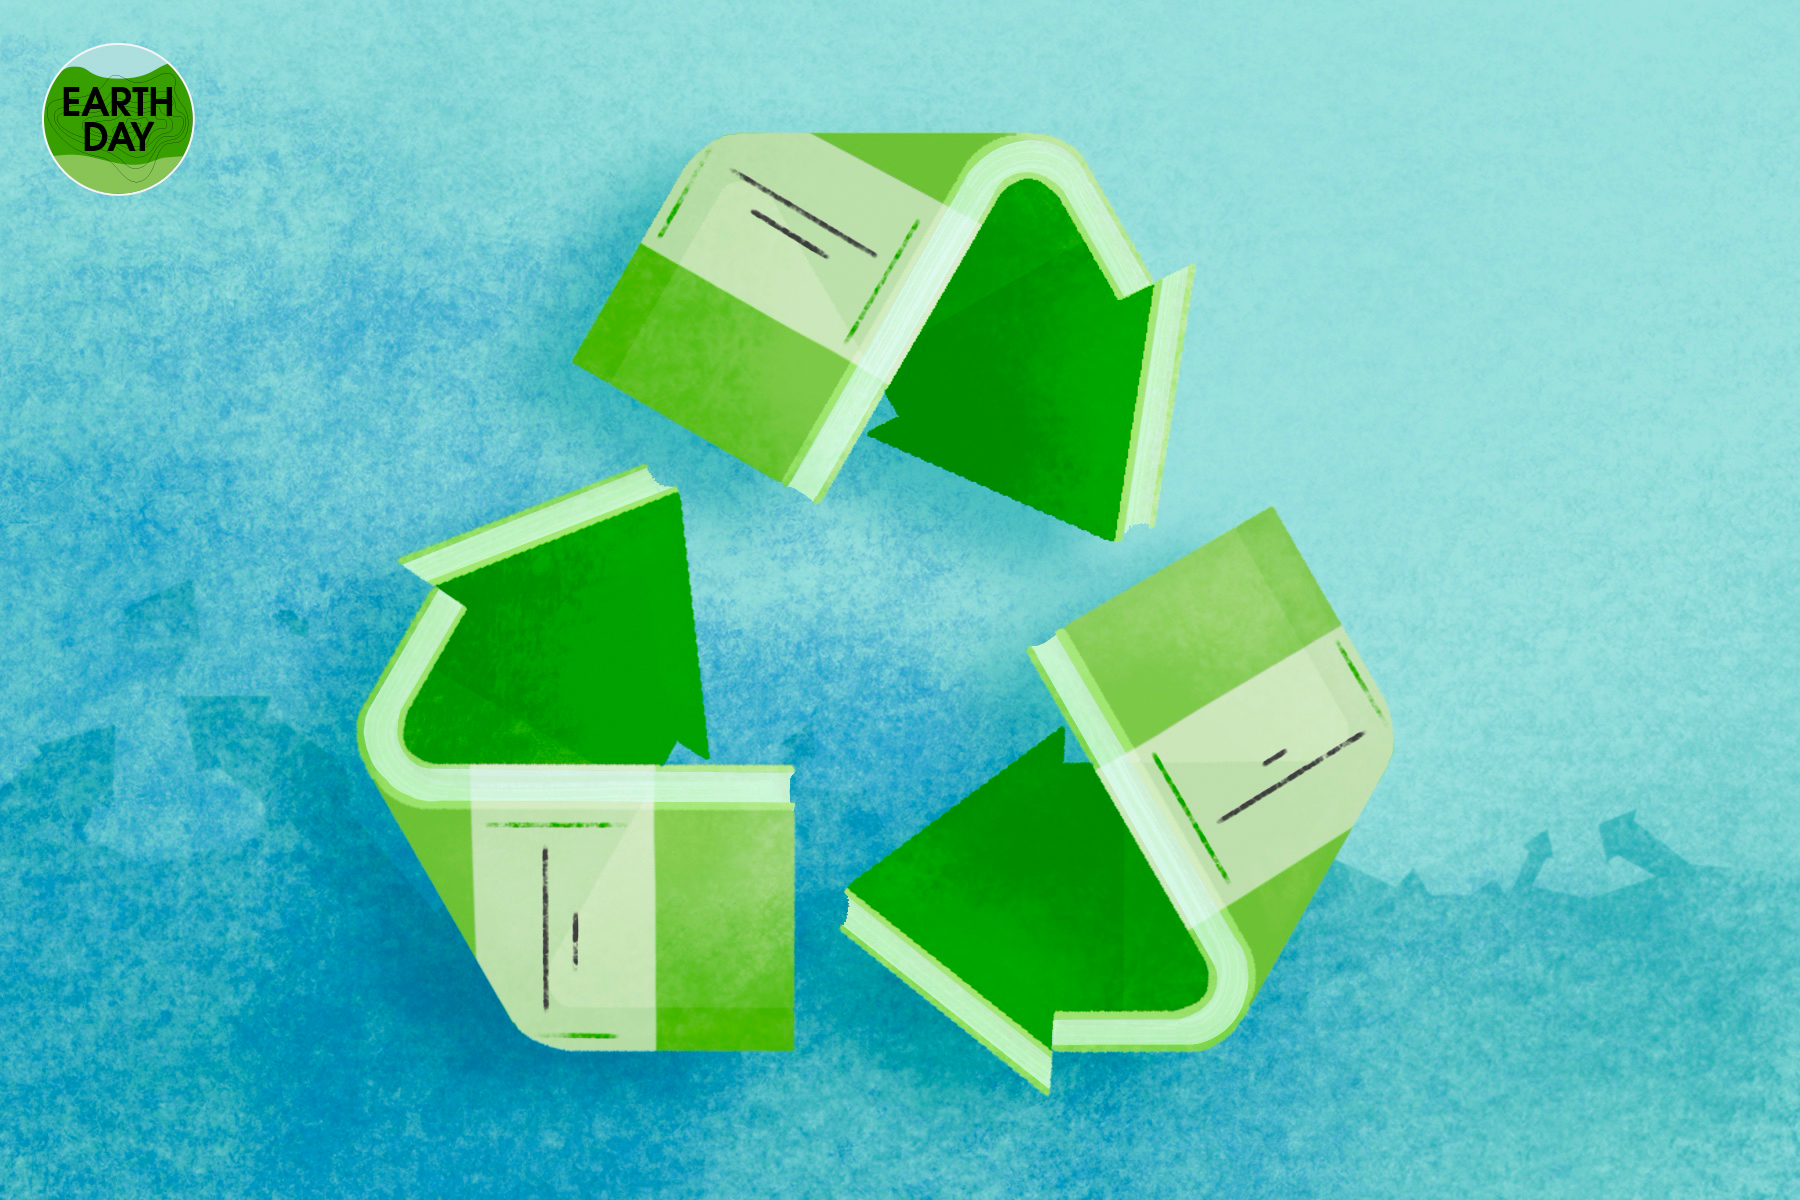 An illustration of a recycling logo made up of green books